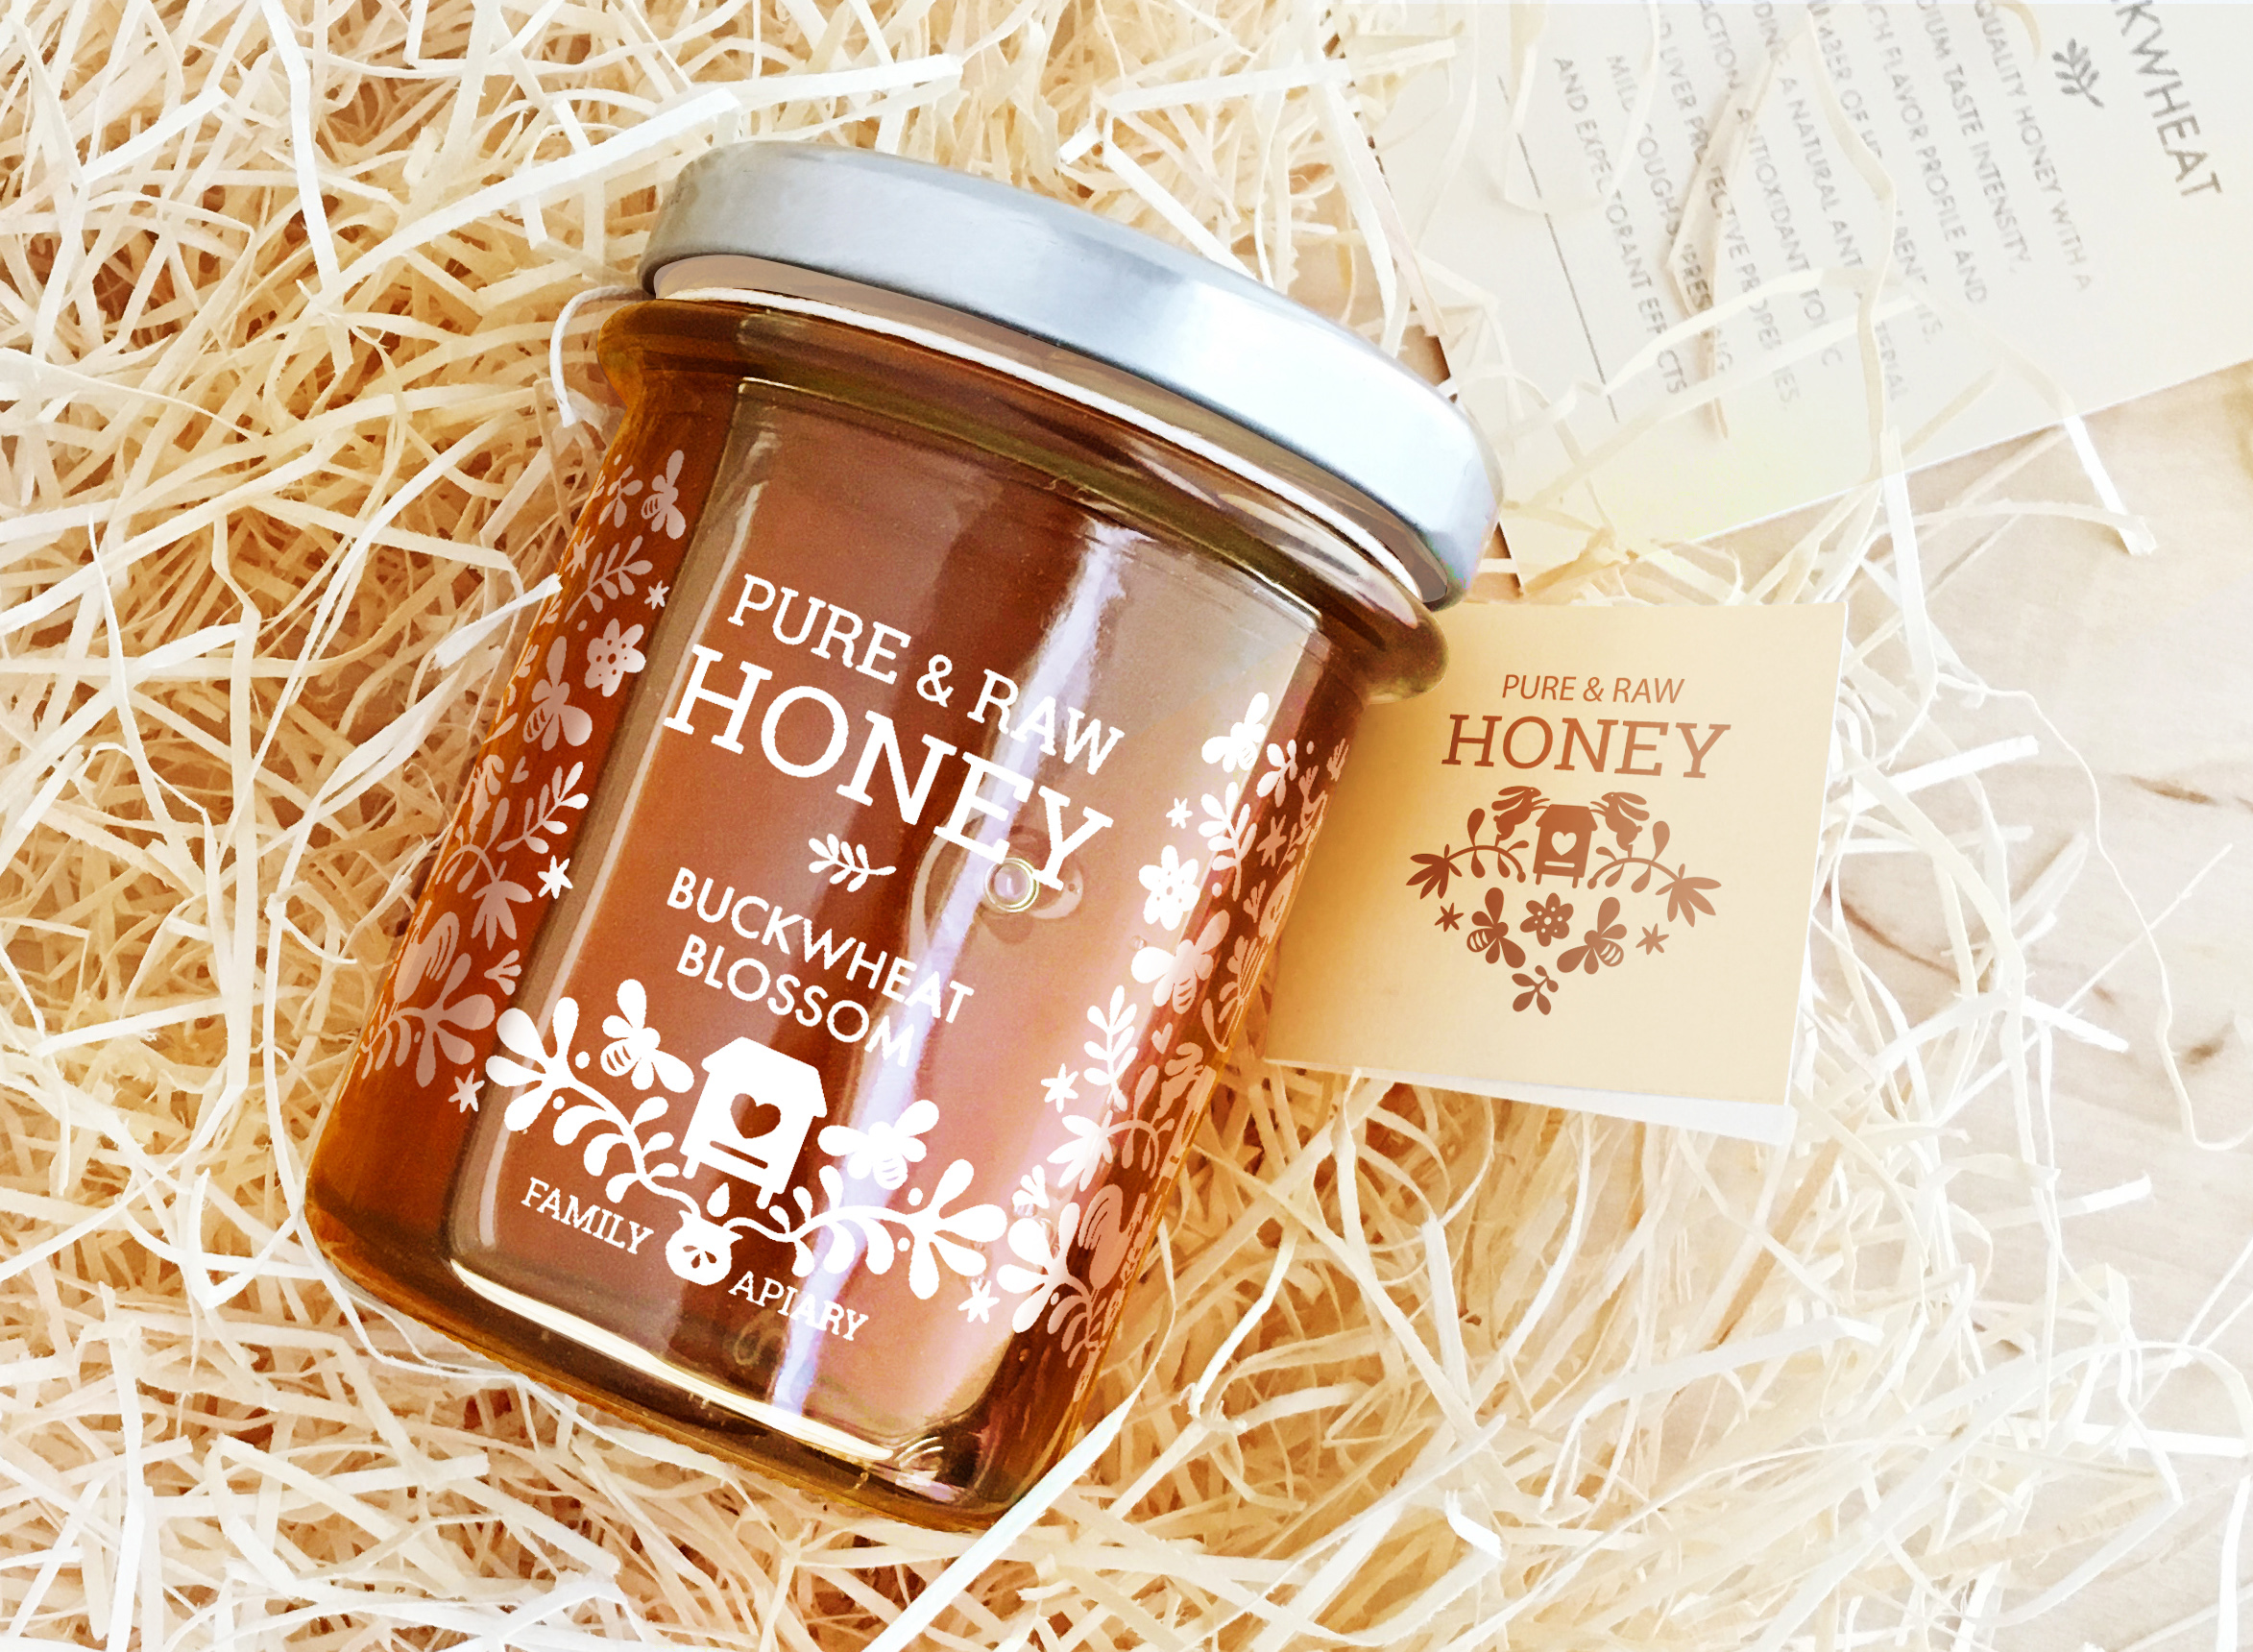 Small Batch Pure and Variant Honey Blossom, with Packaging Design Influenced by Polish folk Art